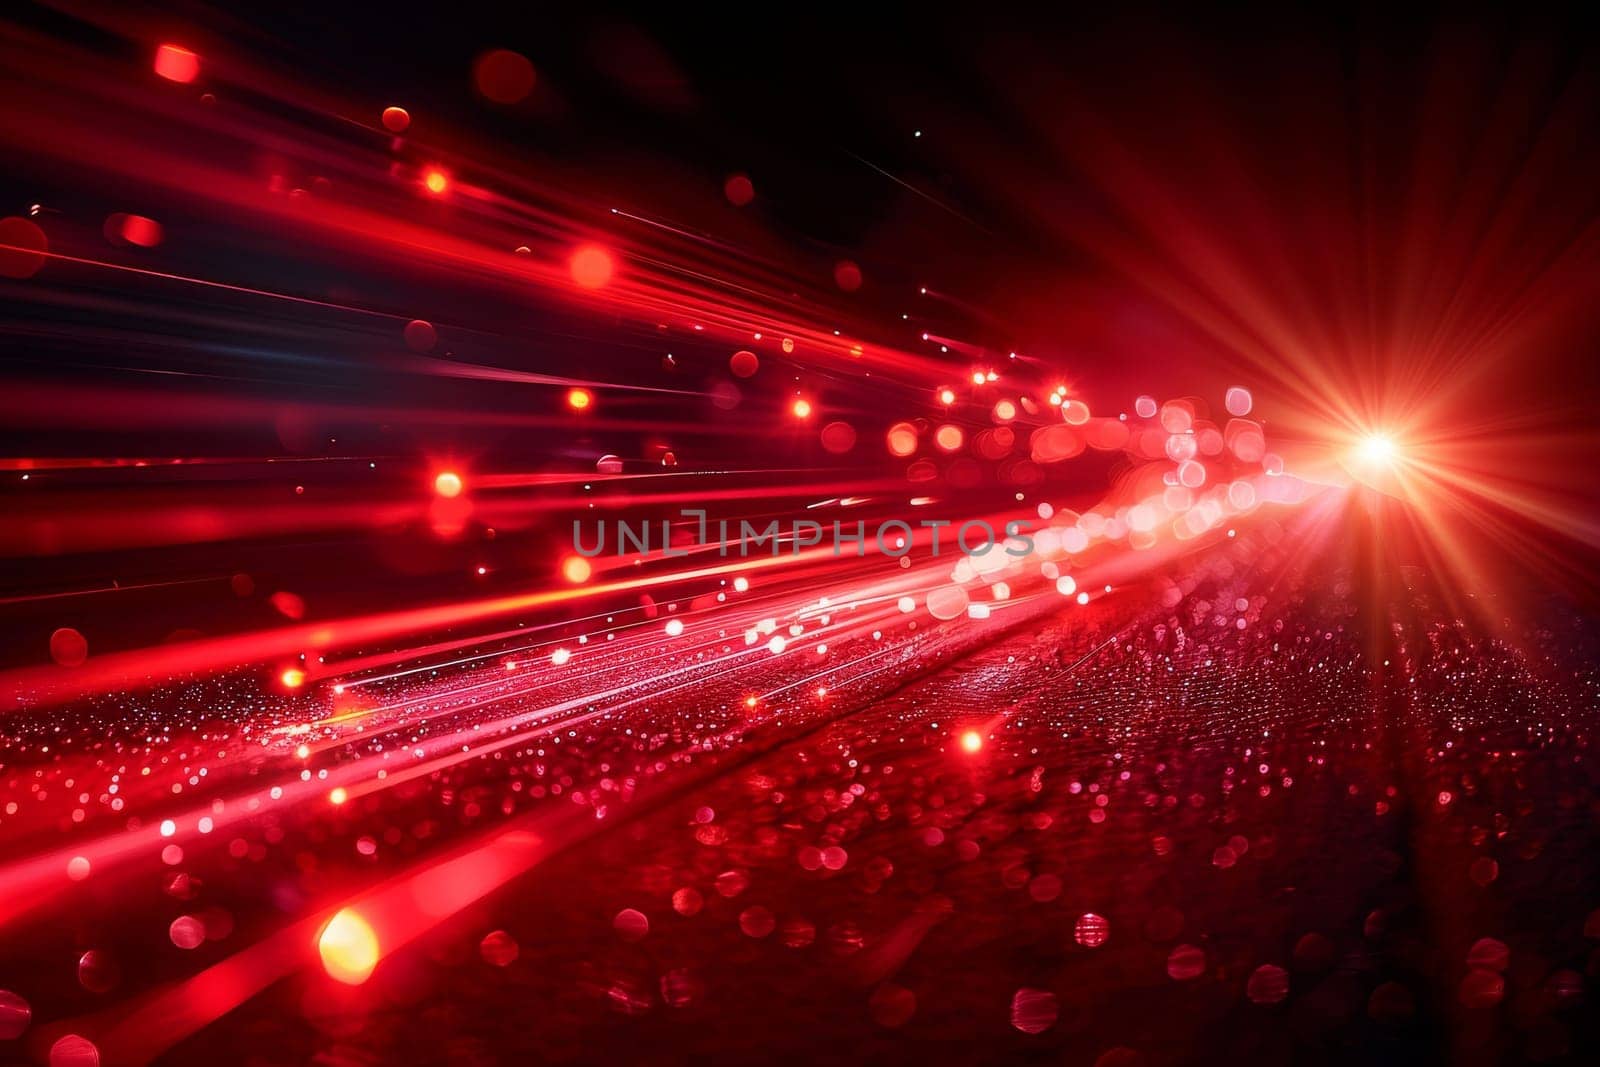 A red streak of light is shown in the image, with a blurry background by itchaznong